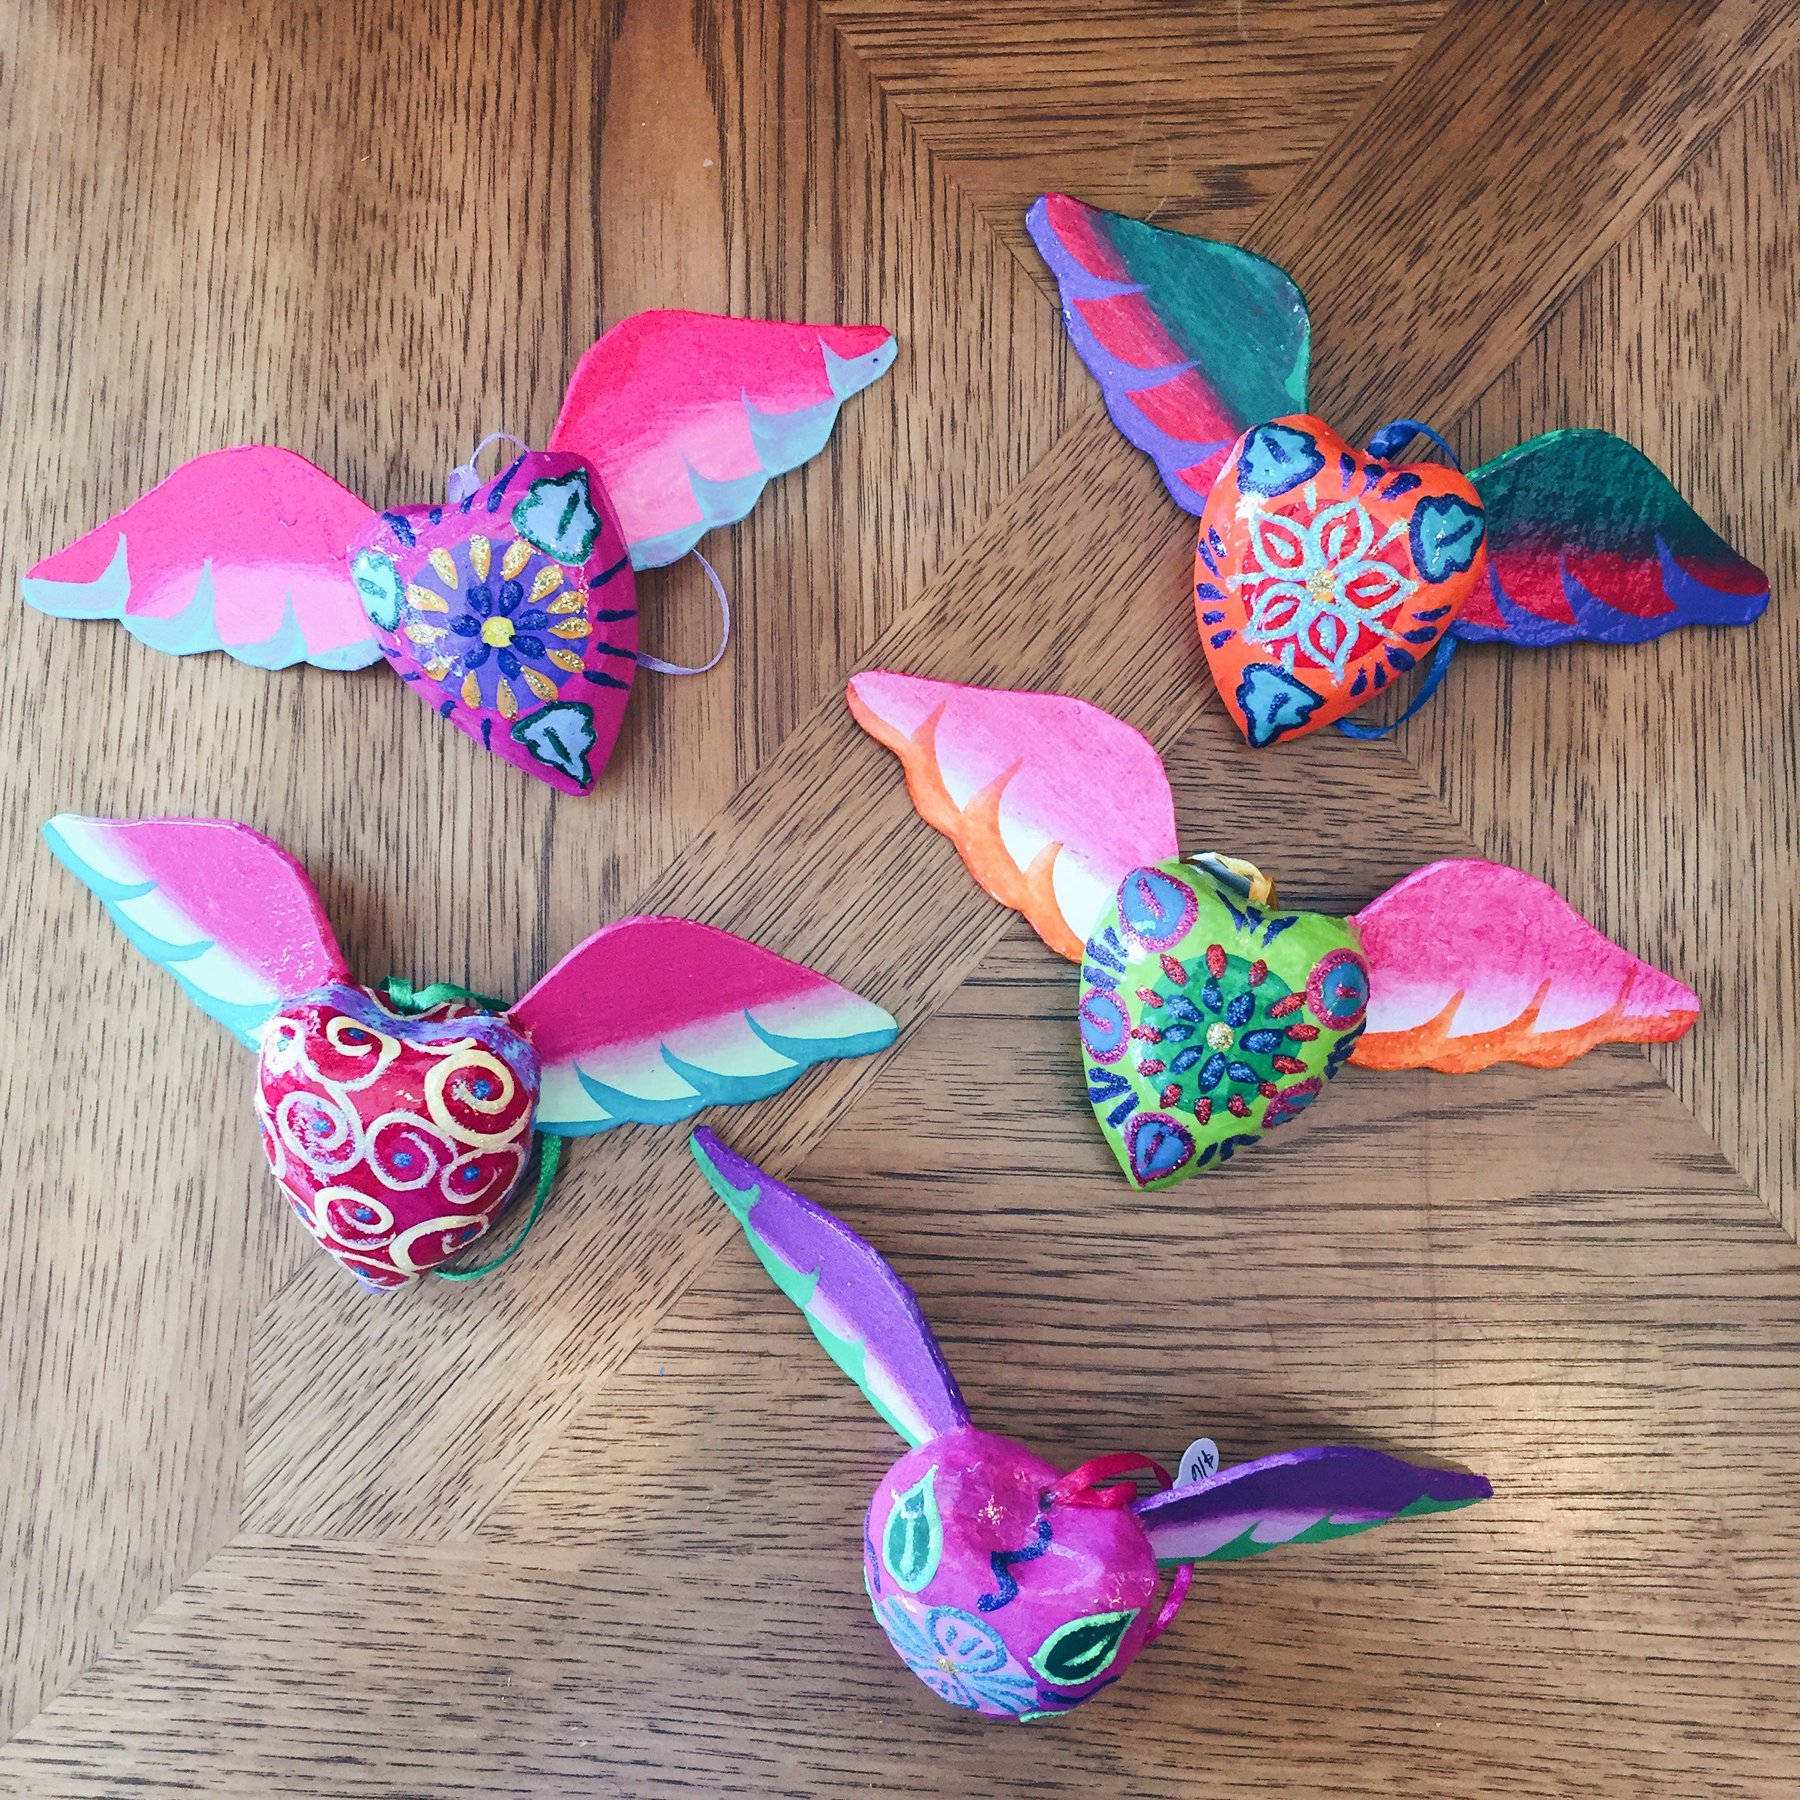 Colorful Hand-painted Paper Mache Heart with Wings Holiday Ornaments ...